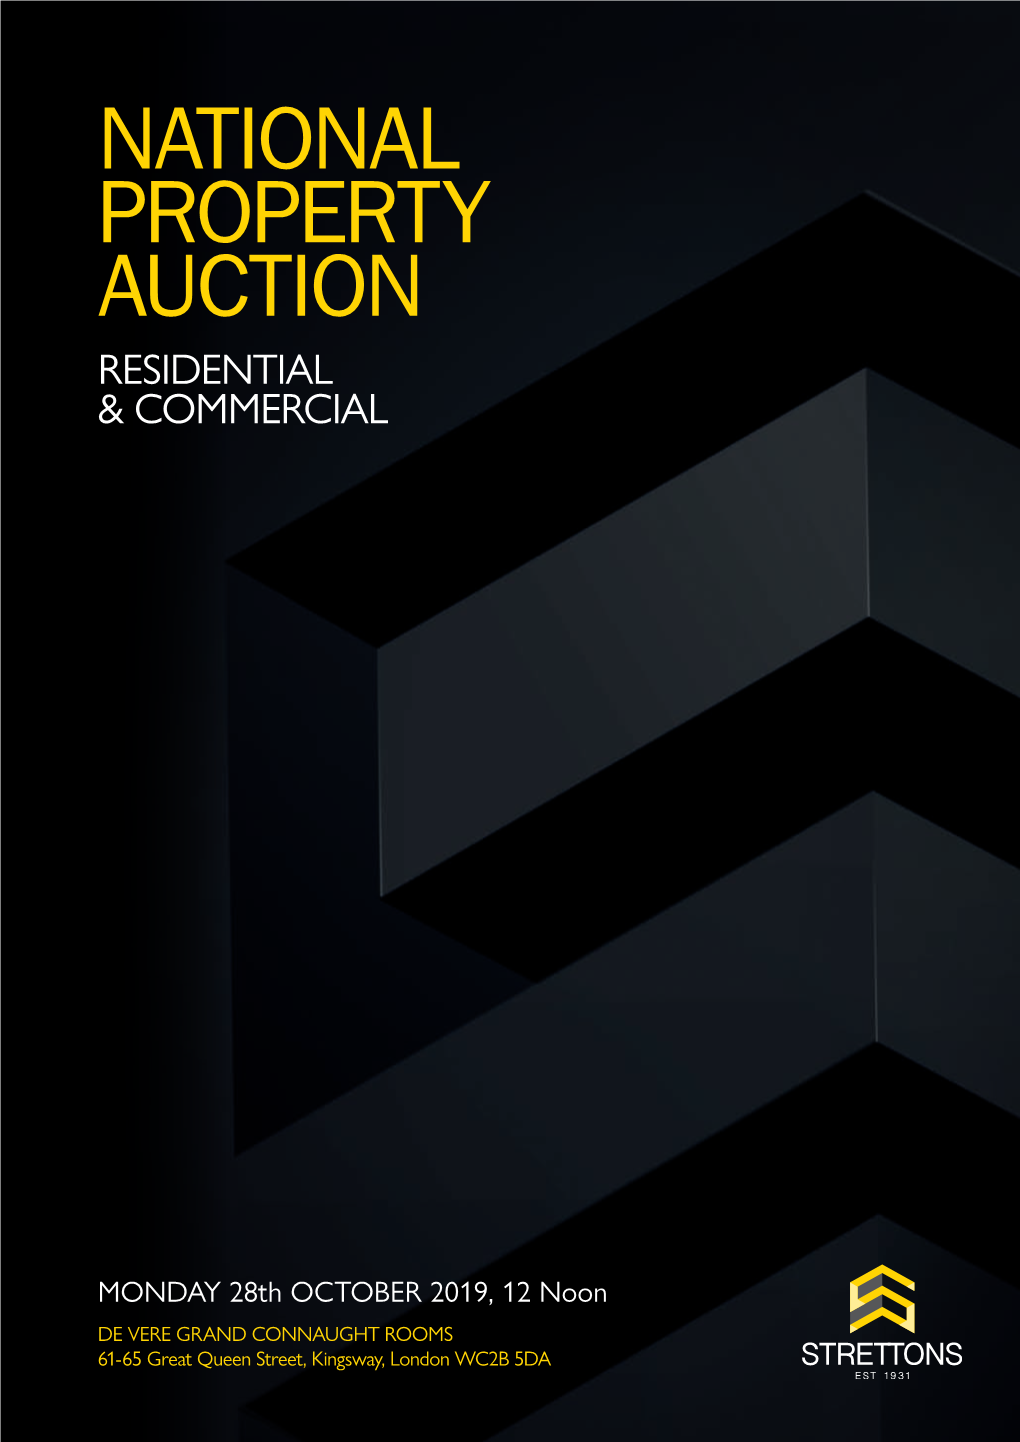 NATIONAL PROPERTY AUCTION MONDAY 28Th OCTOBER 2019, 12 Noon De Vere Grand Connaught Rooms, 61-65 Great Queen Street, Kingsway, London WC2B 5DA